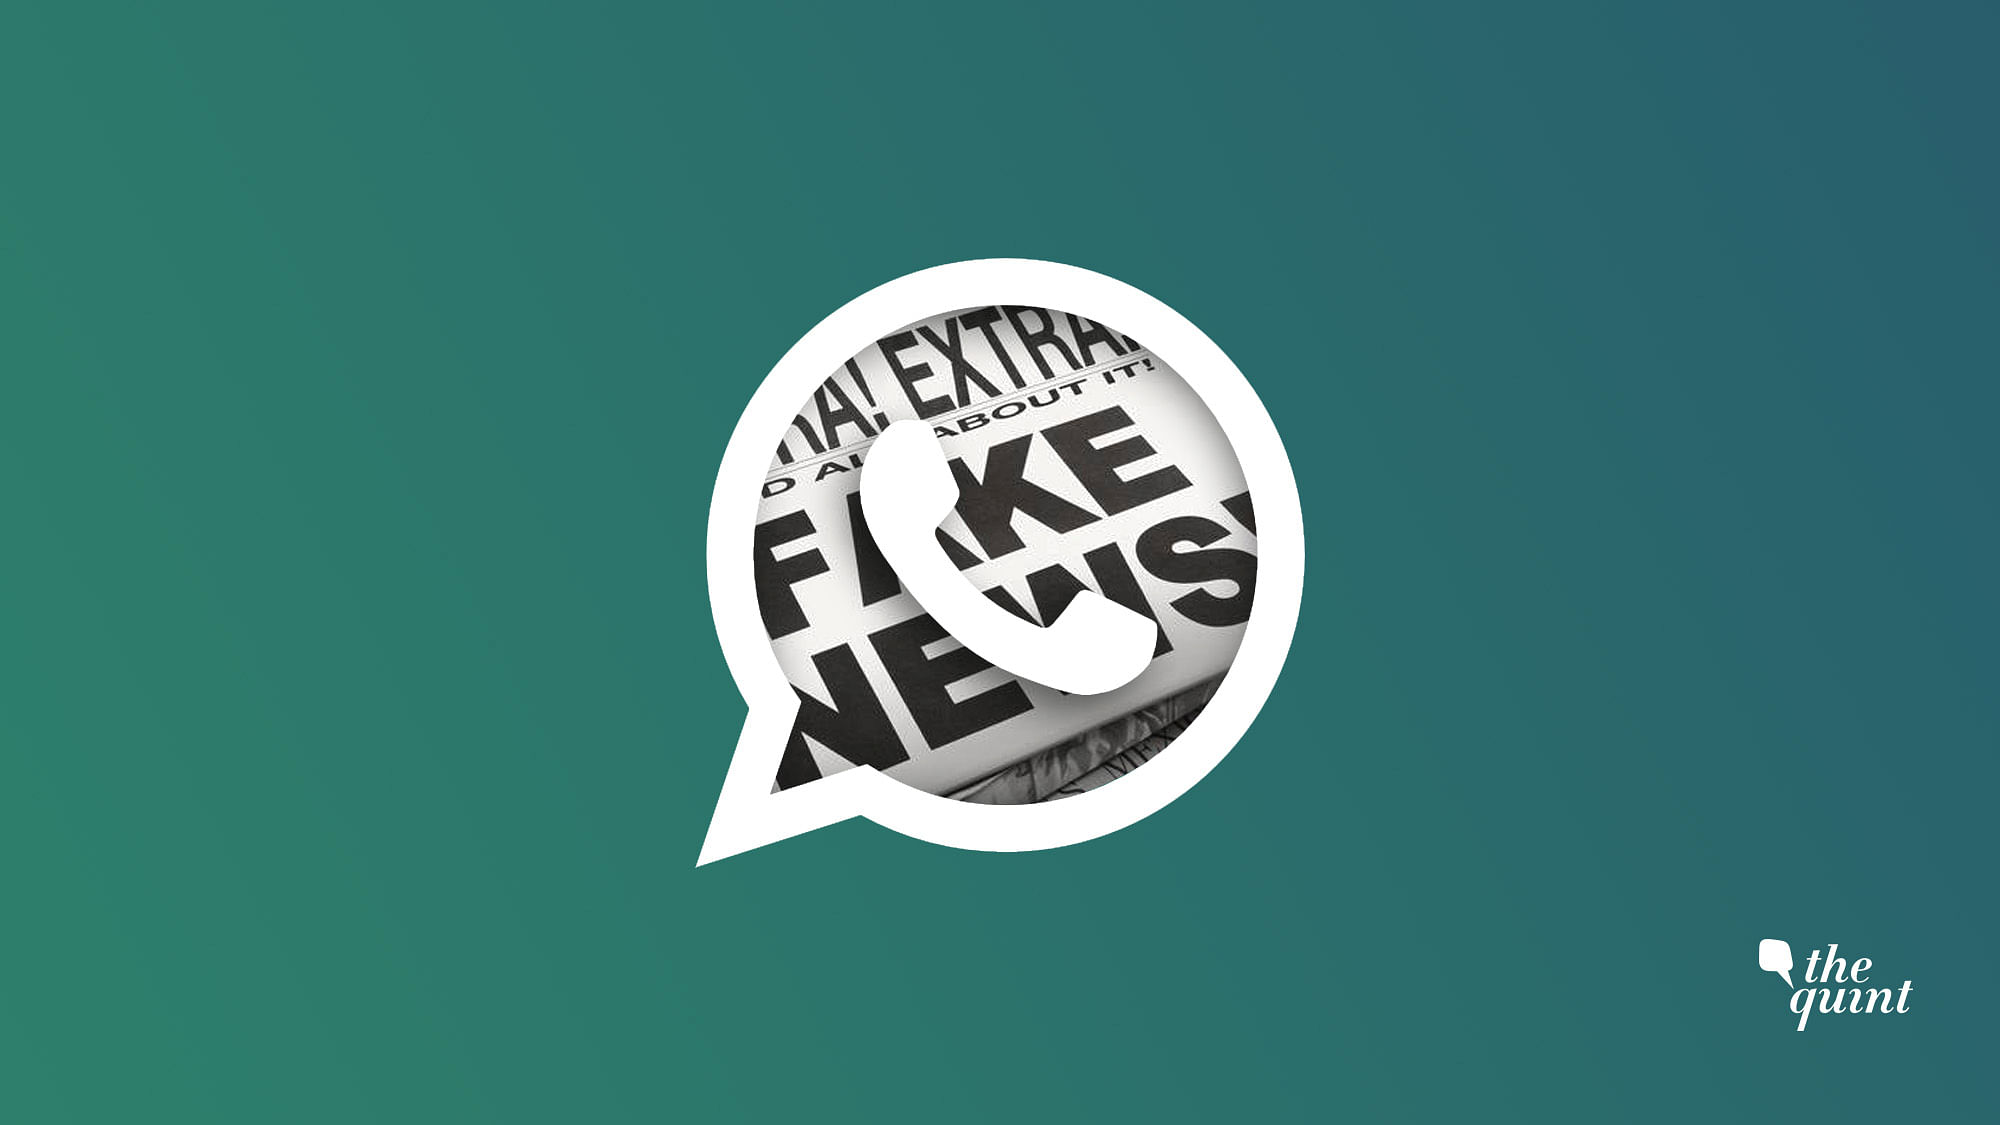 The challenge of dealing with fake news on WhatsApp lies in its encryption that doesn’t allow even the platform to access messages.